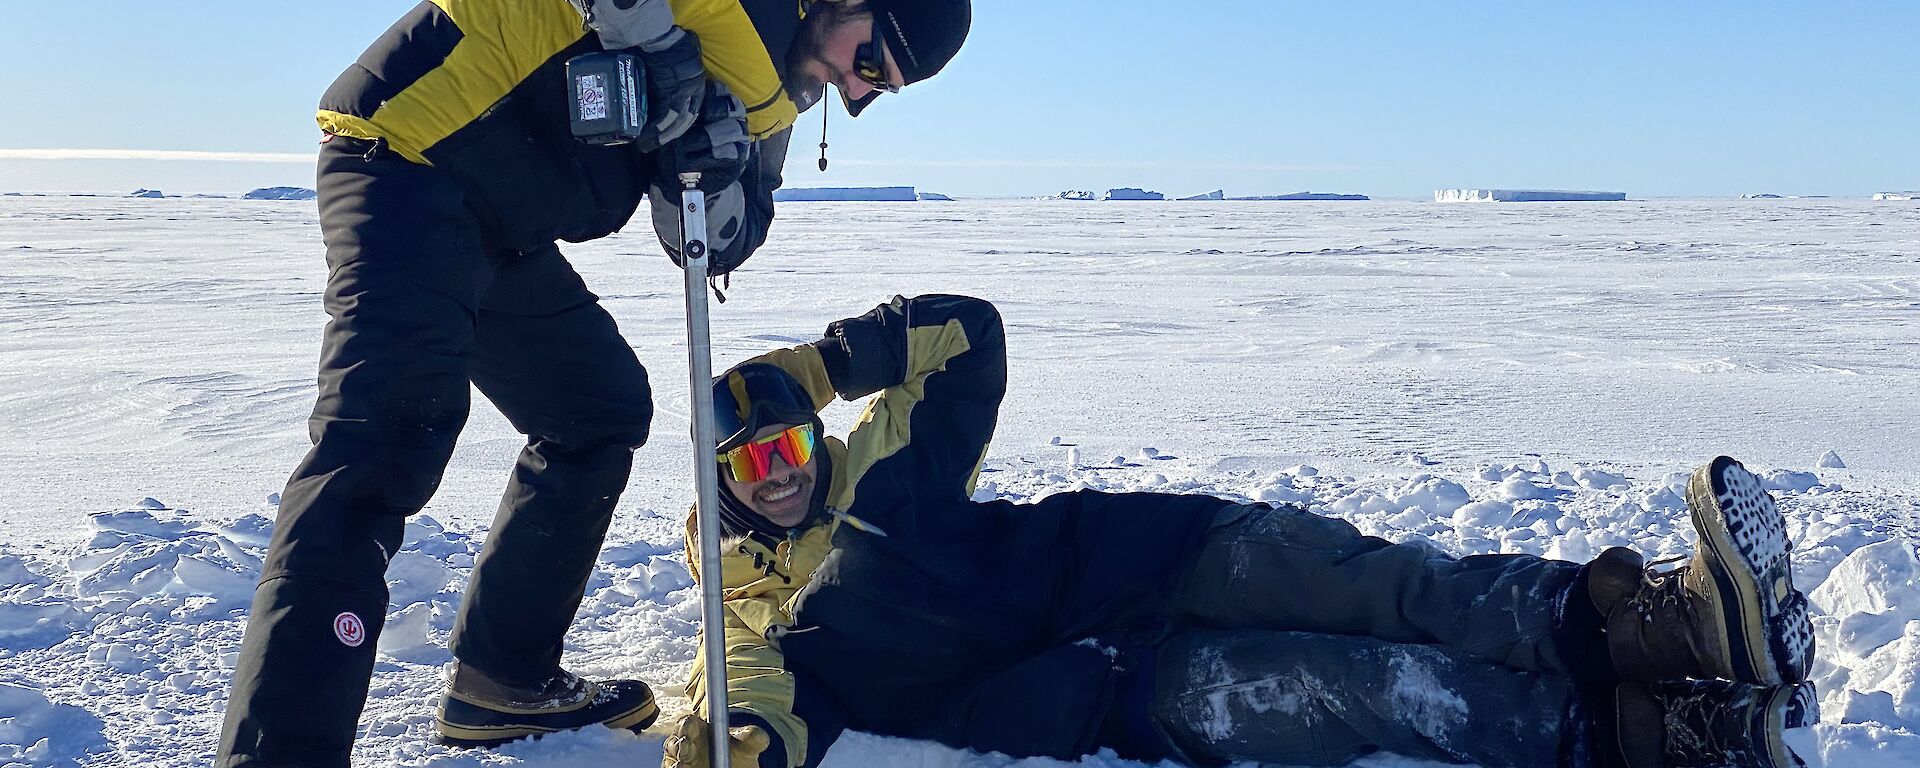 A man drilling into sea ice, leaning his weight onto a hollow drill bit over a metre long stuck perpendicularly into the ice. Another man is stretched out on his side beside the drilling hole, pretending to hold the bit steady and smiling at the camera